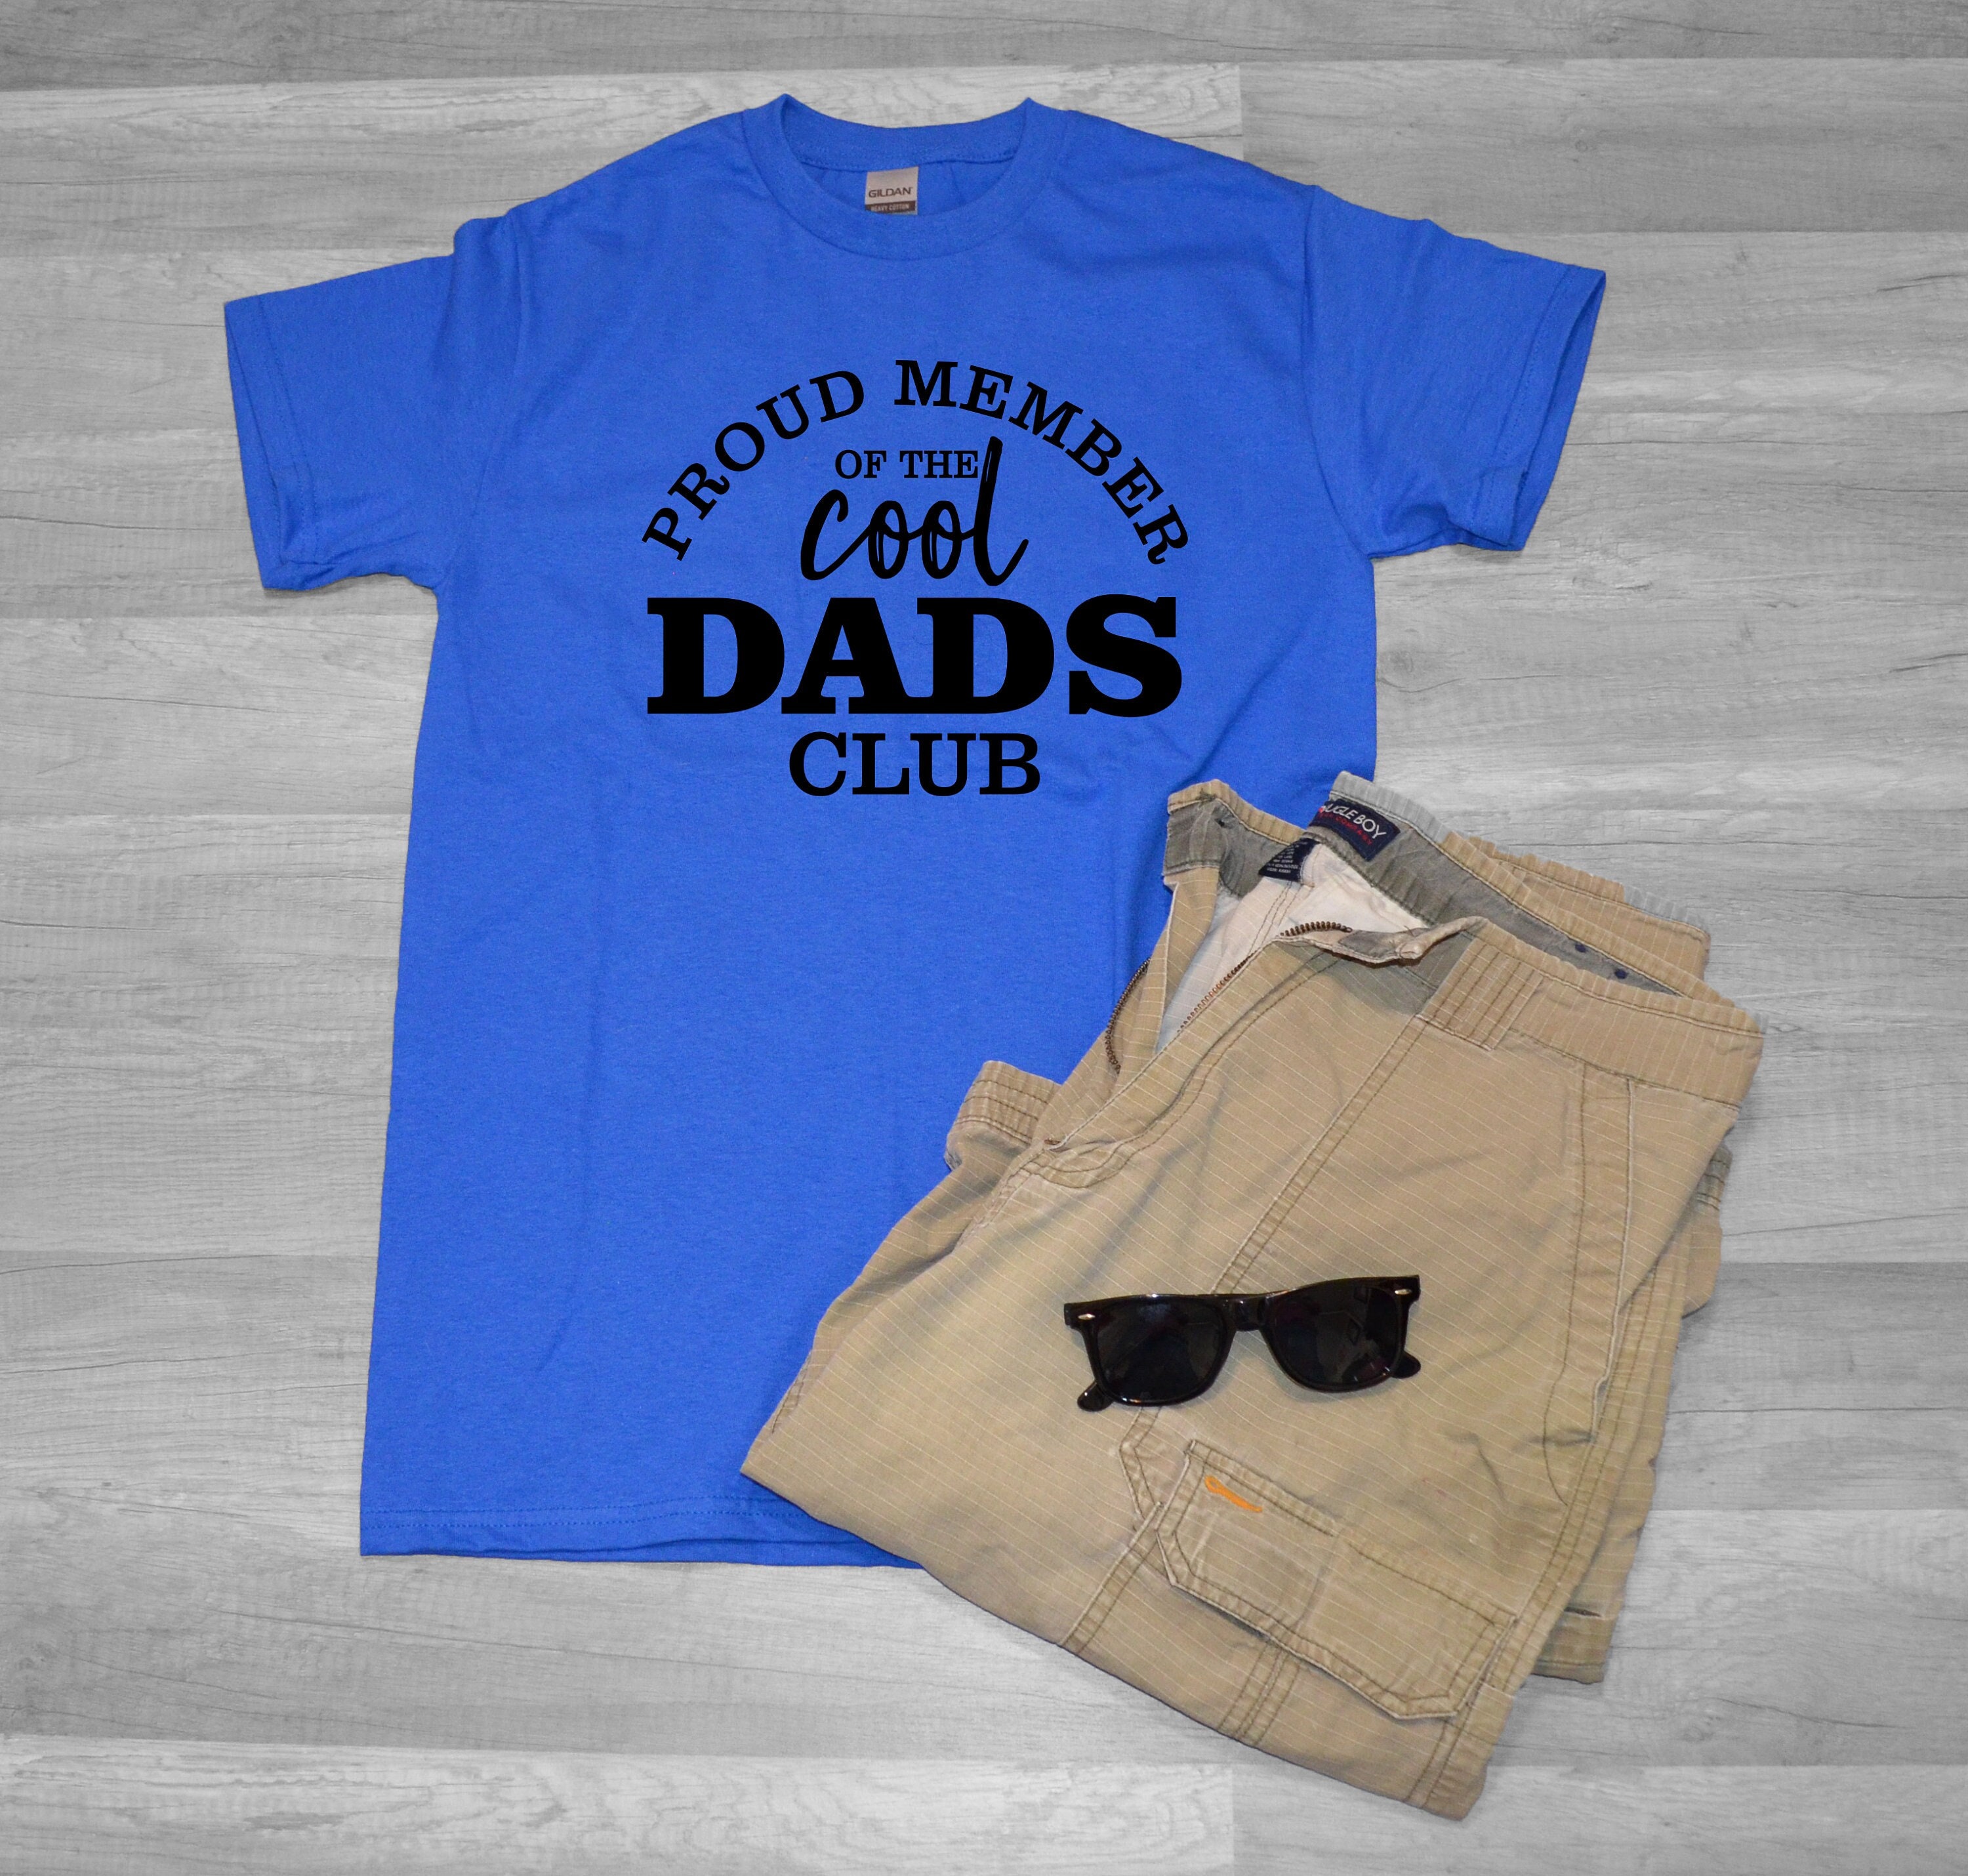 arve Afvist privilegeret Proud Member of the Cool Dads Club T-shirt Proud Member of - Etsy